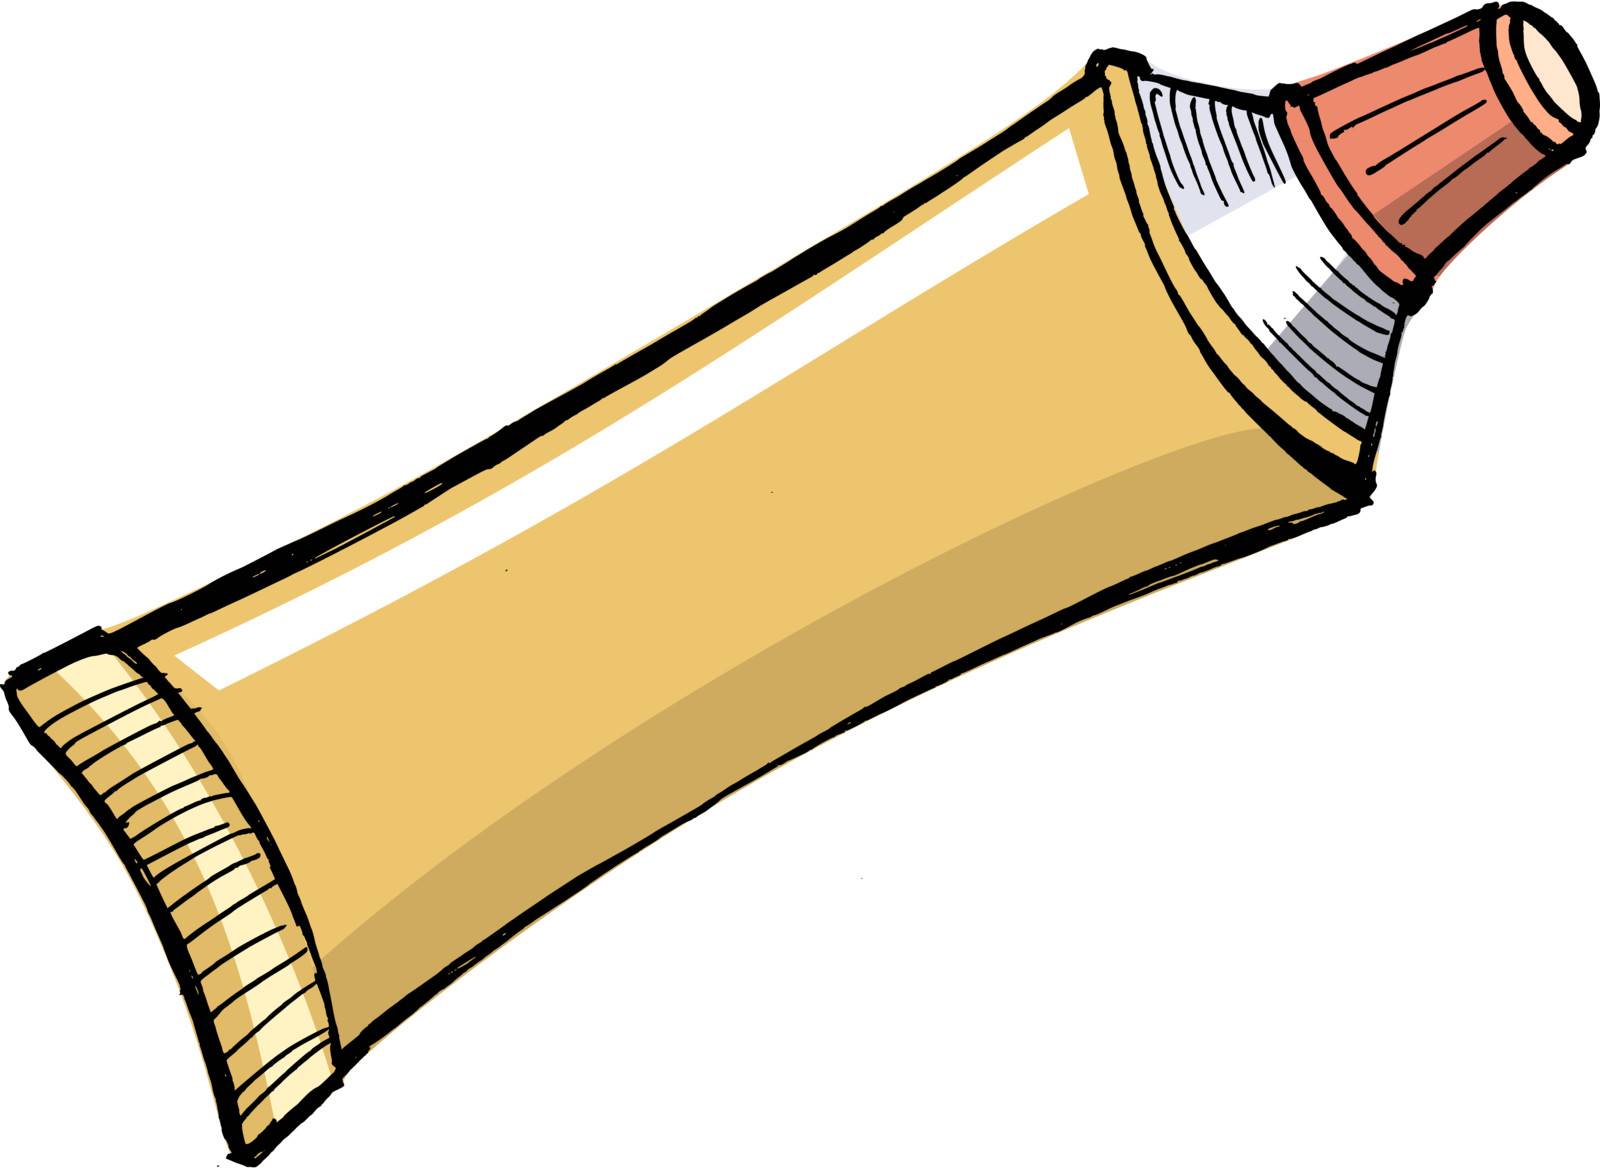 Illustration of tube of toothpaste and other paste